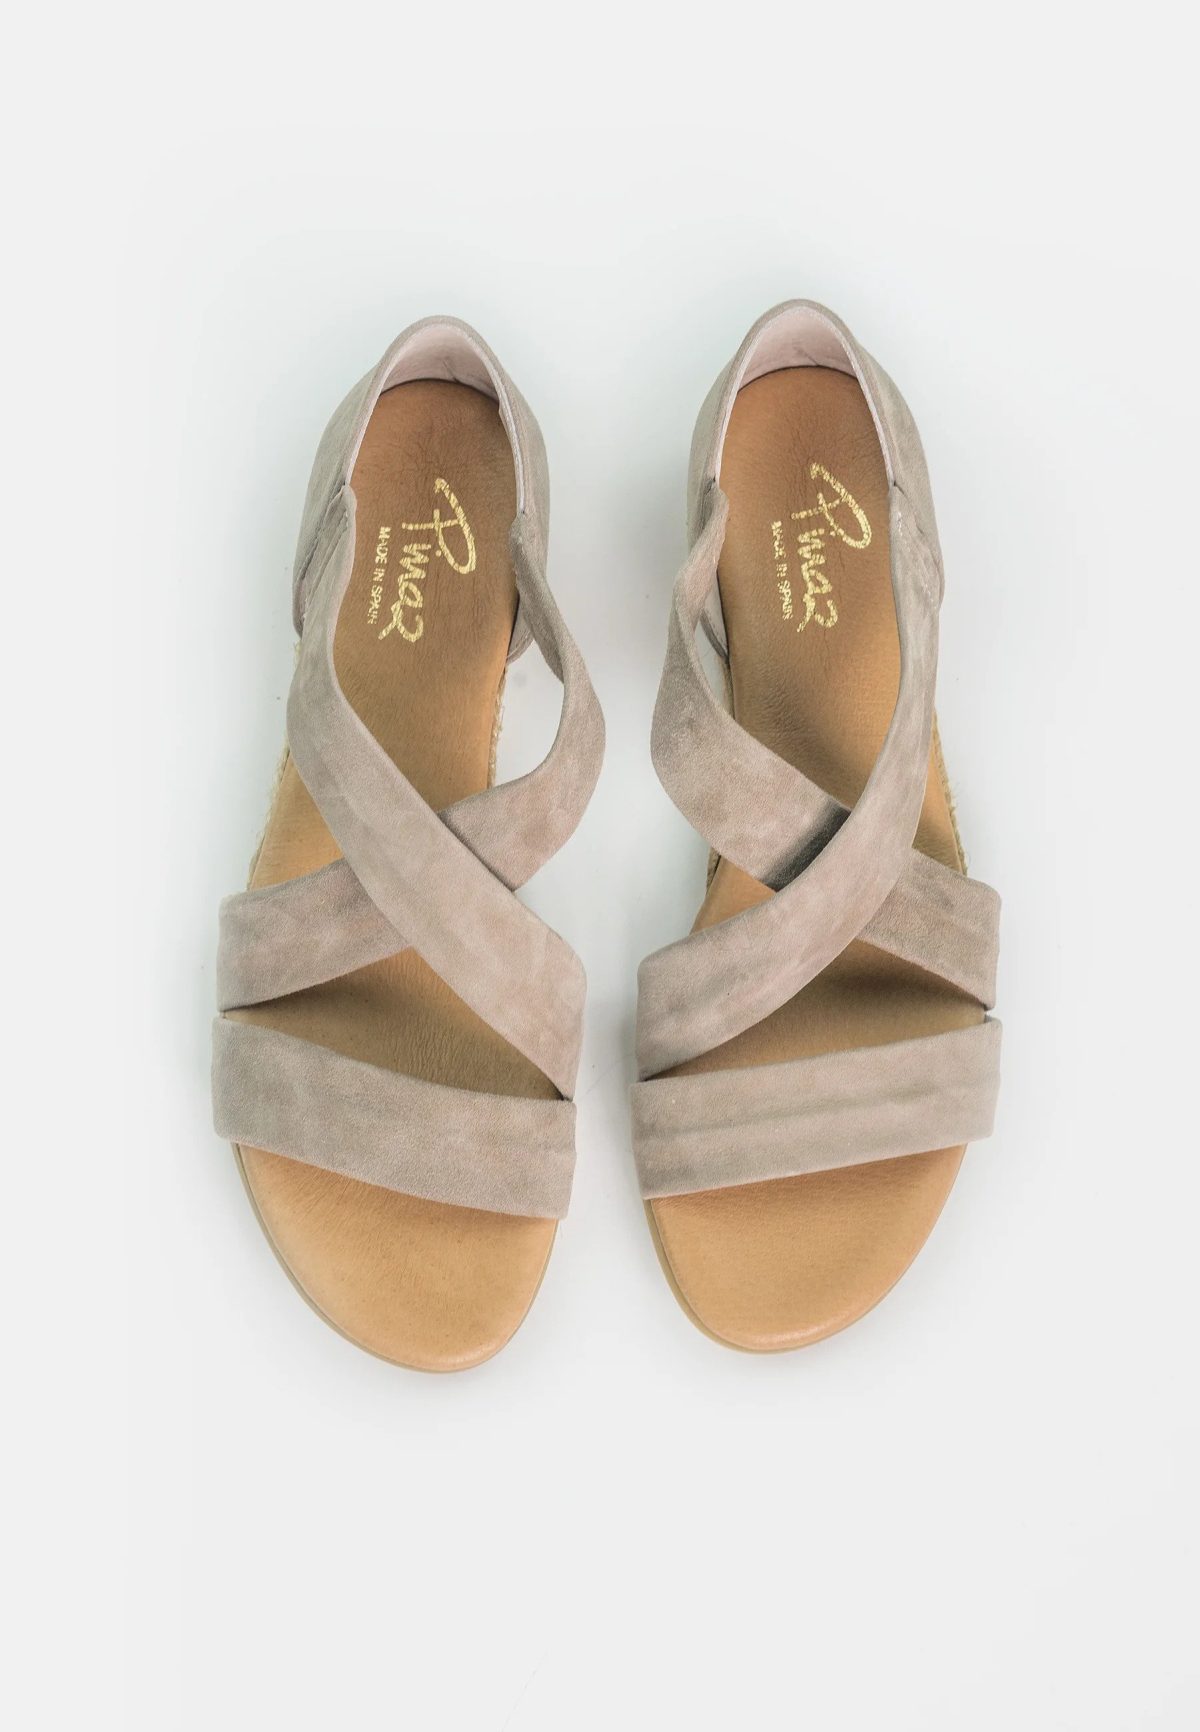 Pinaz 317 AO Taupe Low Espadrille Wedge Sandal | Ooh Ooh Shoes women's clothing and shoe boutique located in Naples and Mashpee